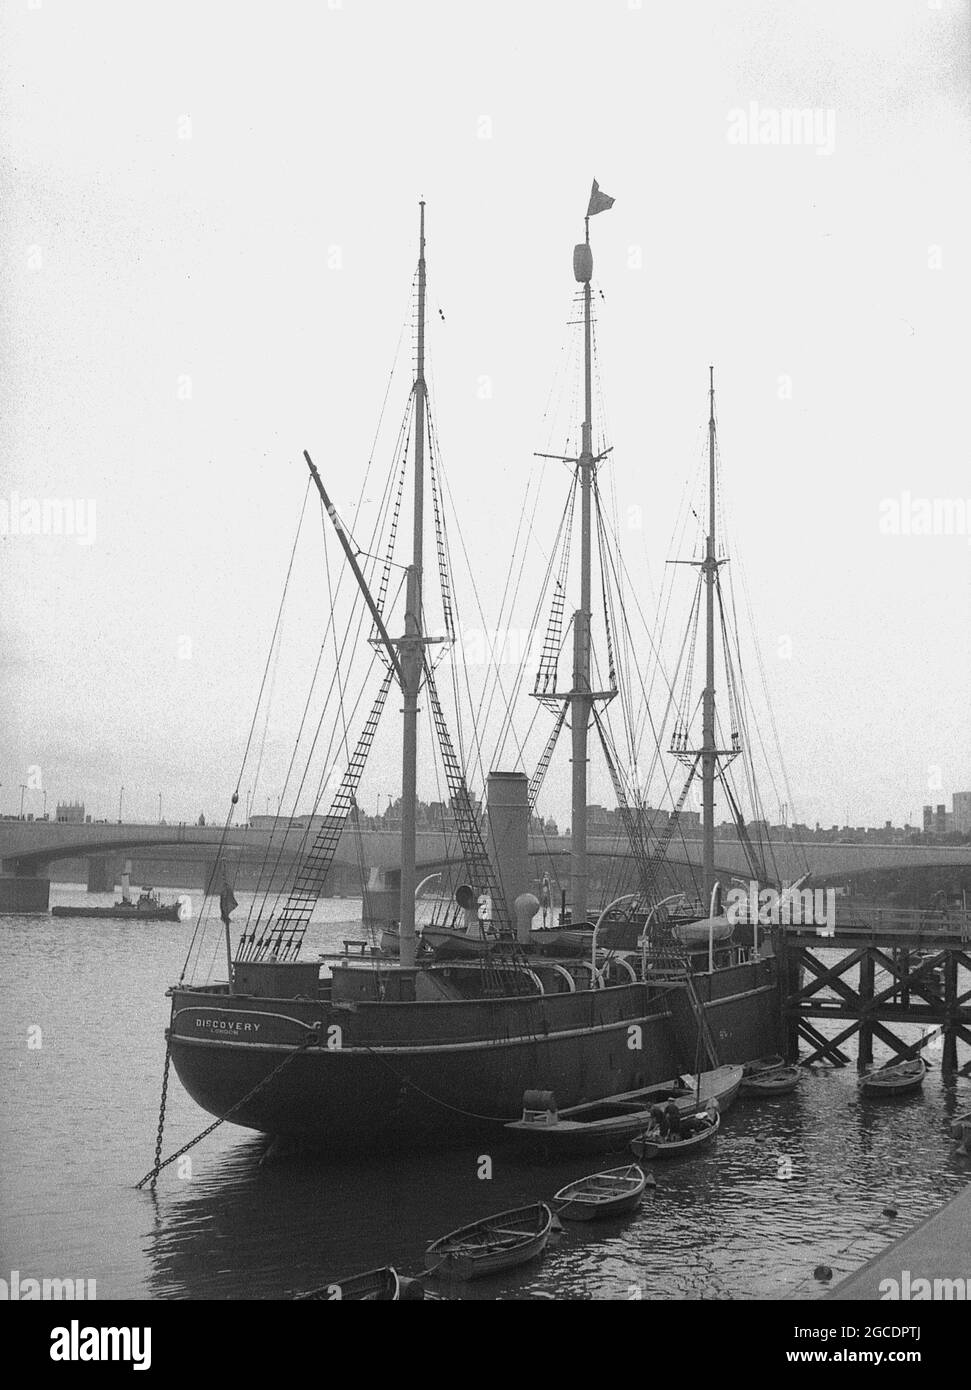 1950s, historical view of the famous barque-rigged sailing ship, 'RRS Discovery' on the river Thames, London, England, UK, the last wooden three-masted ship to be built in Britain. A sailing vessel wth auxillary steam propulsion, she was constructed in Dundee, Scotland. Built specially for Antartic research, her first journey, known as the Discovery Expedition (1901-1904) carried British explorers Robert Falcon Scott and Ernest Shackletone to the region. After being in the Australian Antartic from 1929 to 1931, she was then moored on the Thames as a static training ship and visitor attraction. Stock Photo